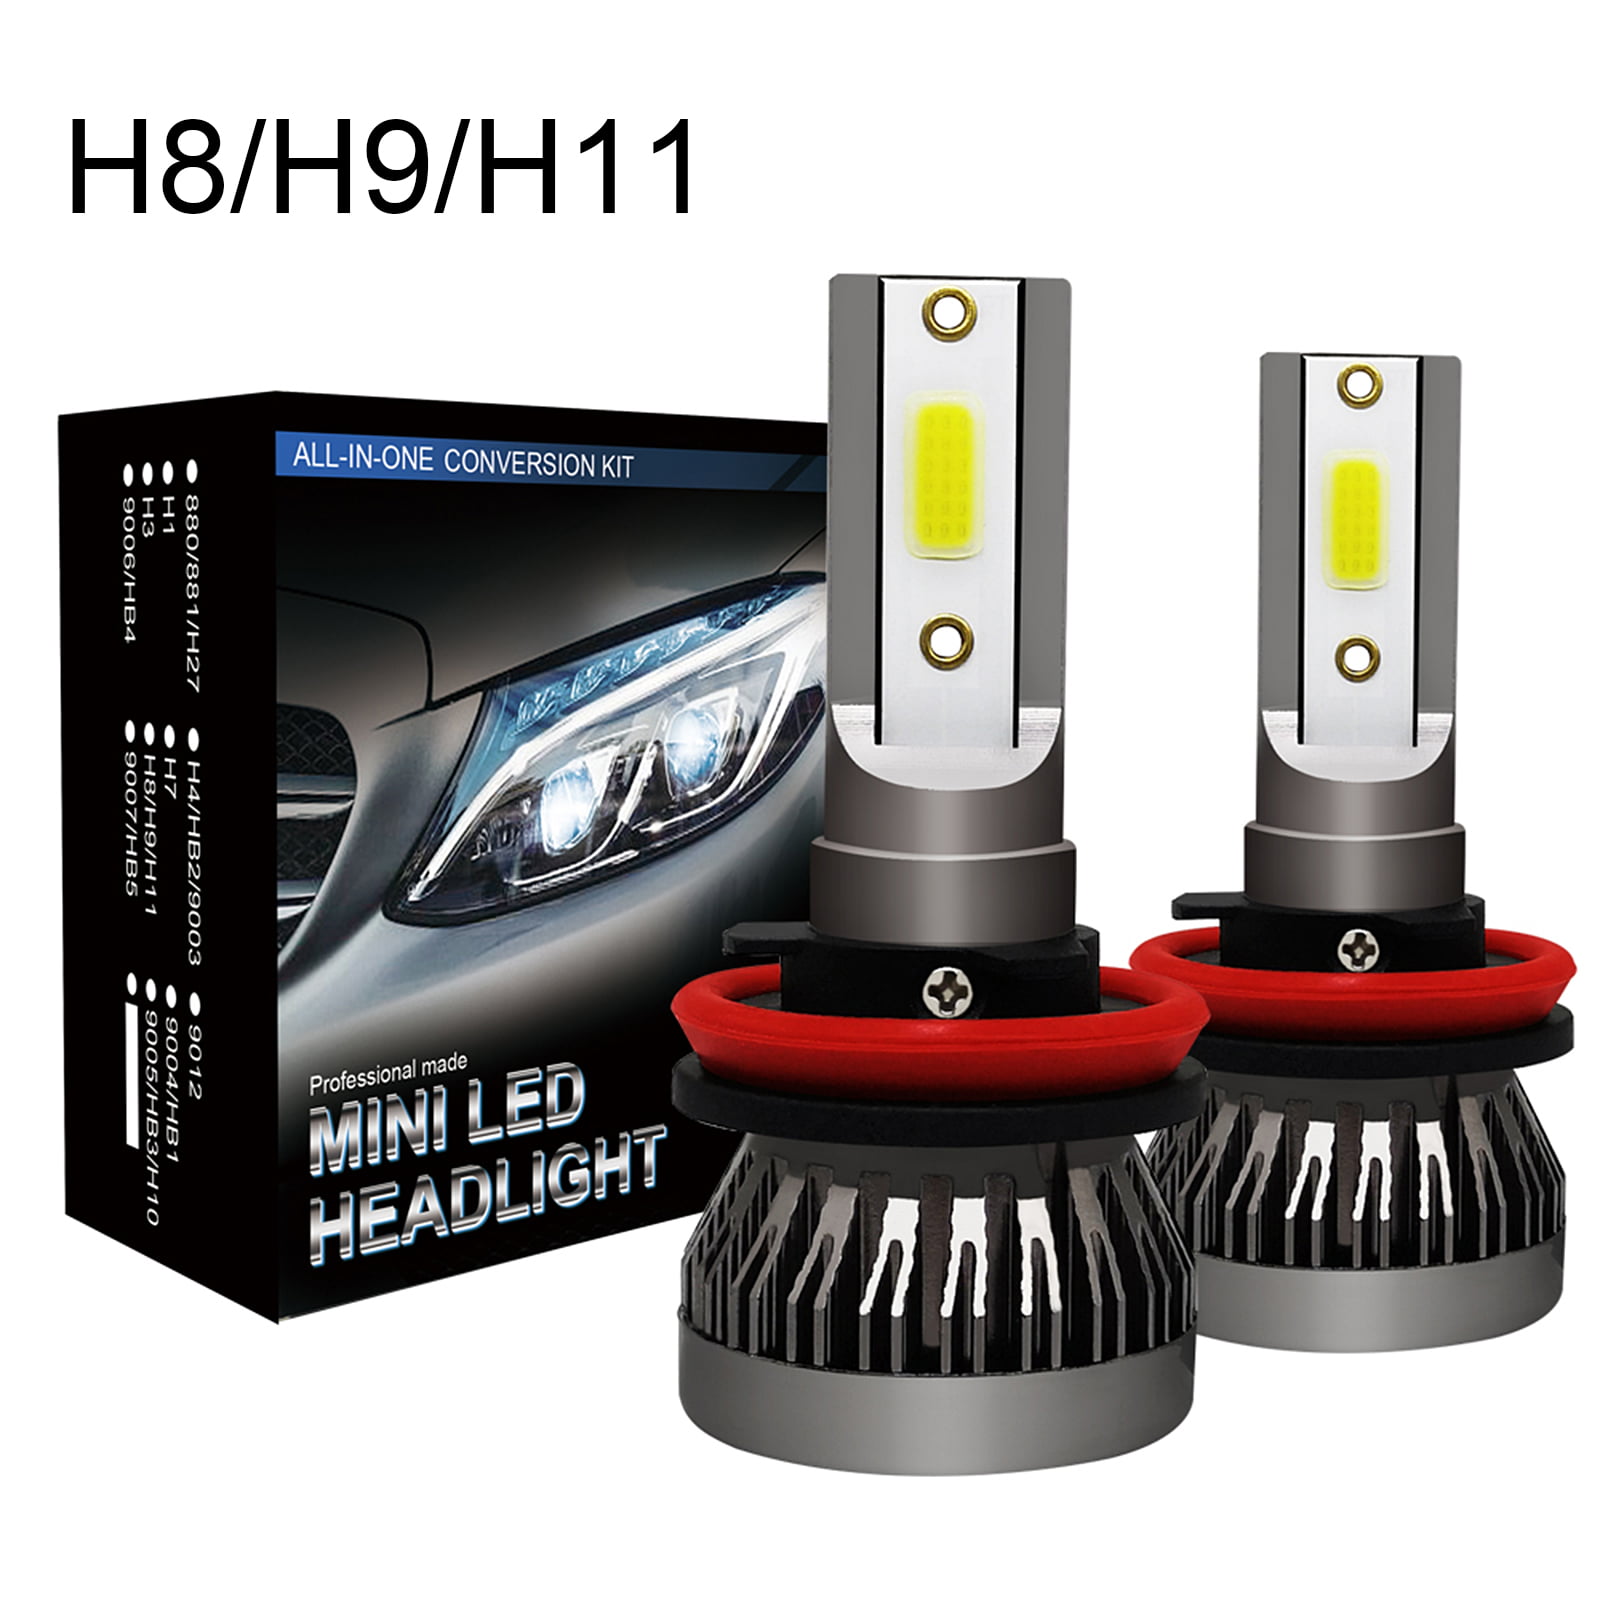 Pack of 2 Canitu LED Headlight Bulbs Lamp 60W 6000LM 6500K Cool White COB Chip High or Low Beam S2 Series H7 All-in-one Light Conversion Kit Set 